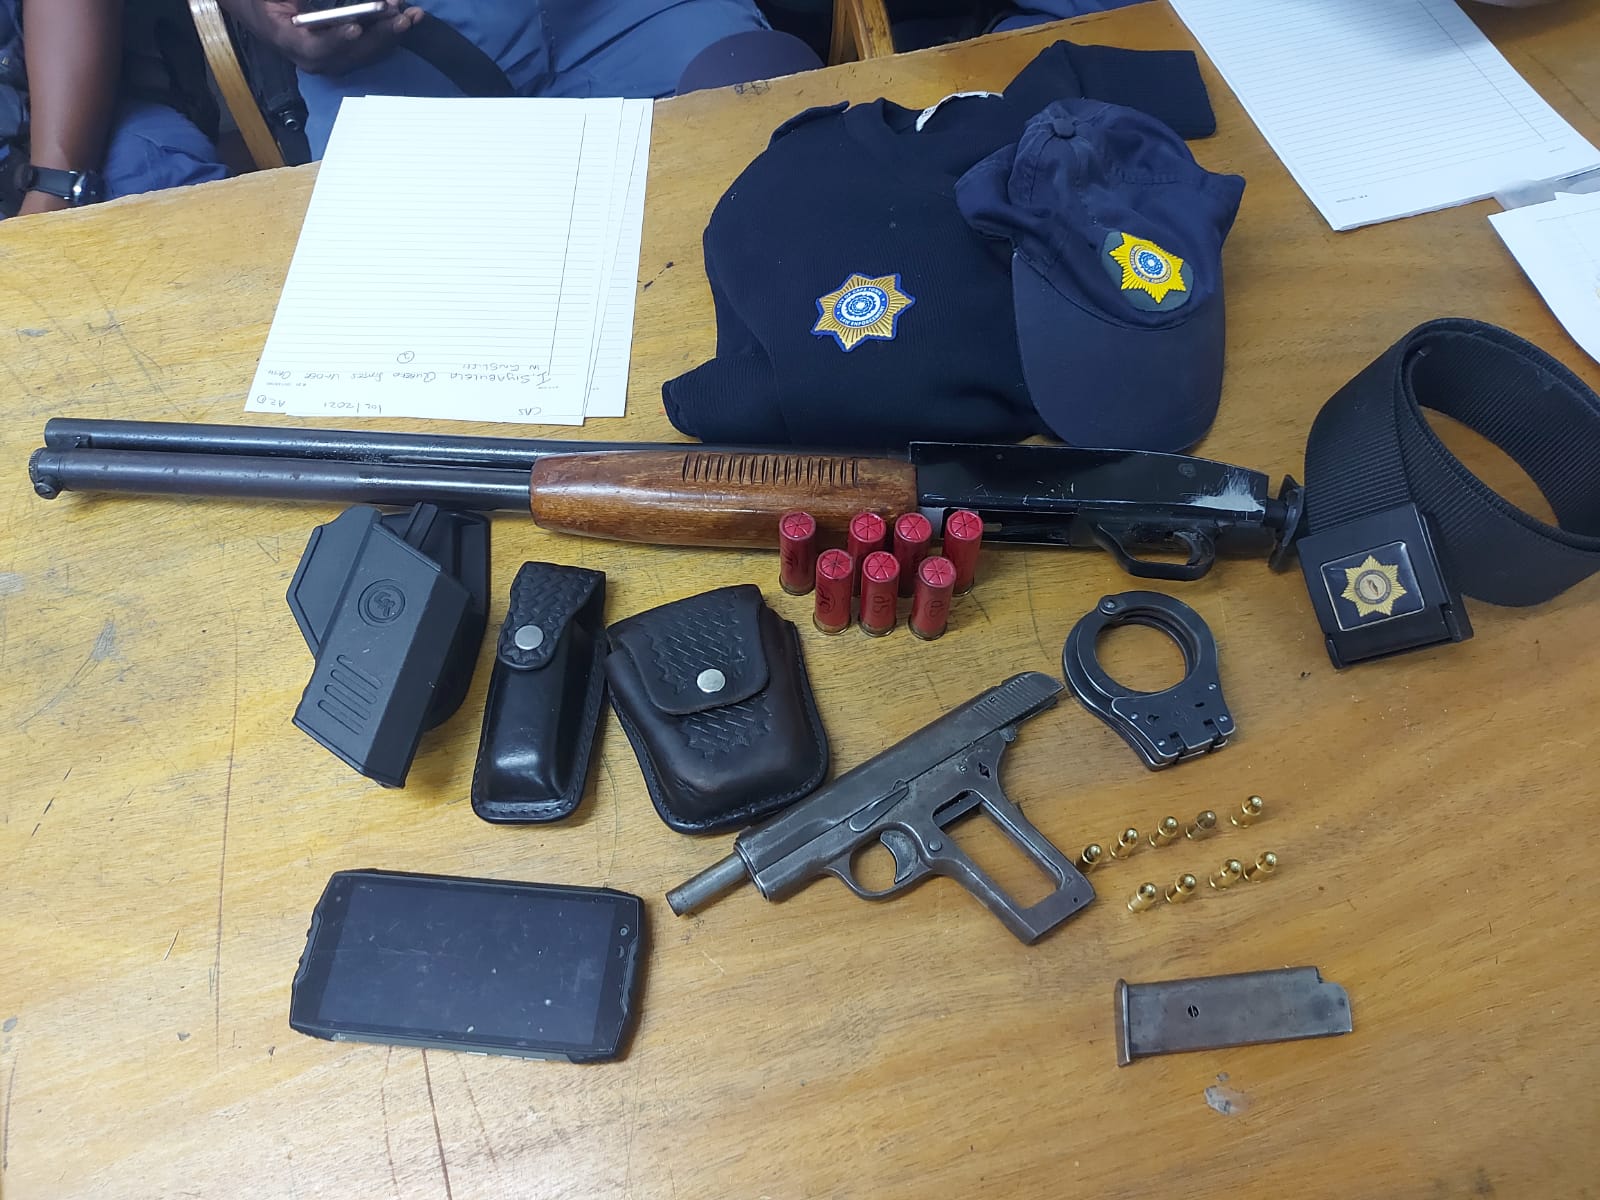 Western Cape police reckon illegal firearms responsible for recent spate of murders